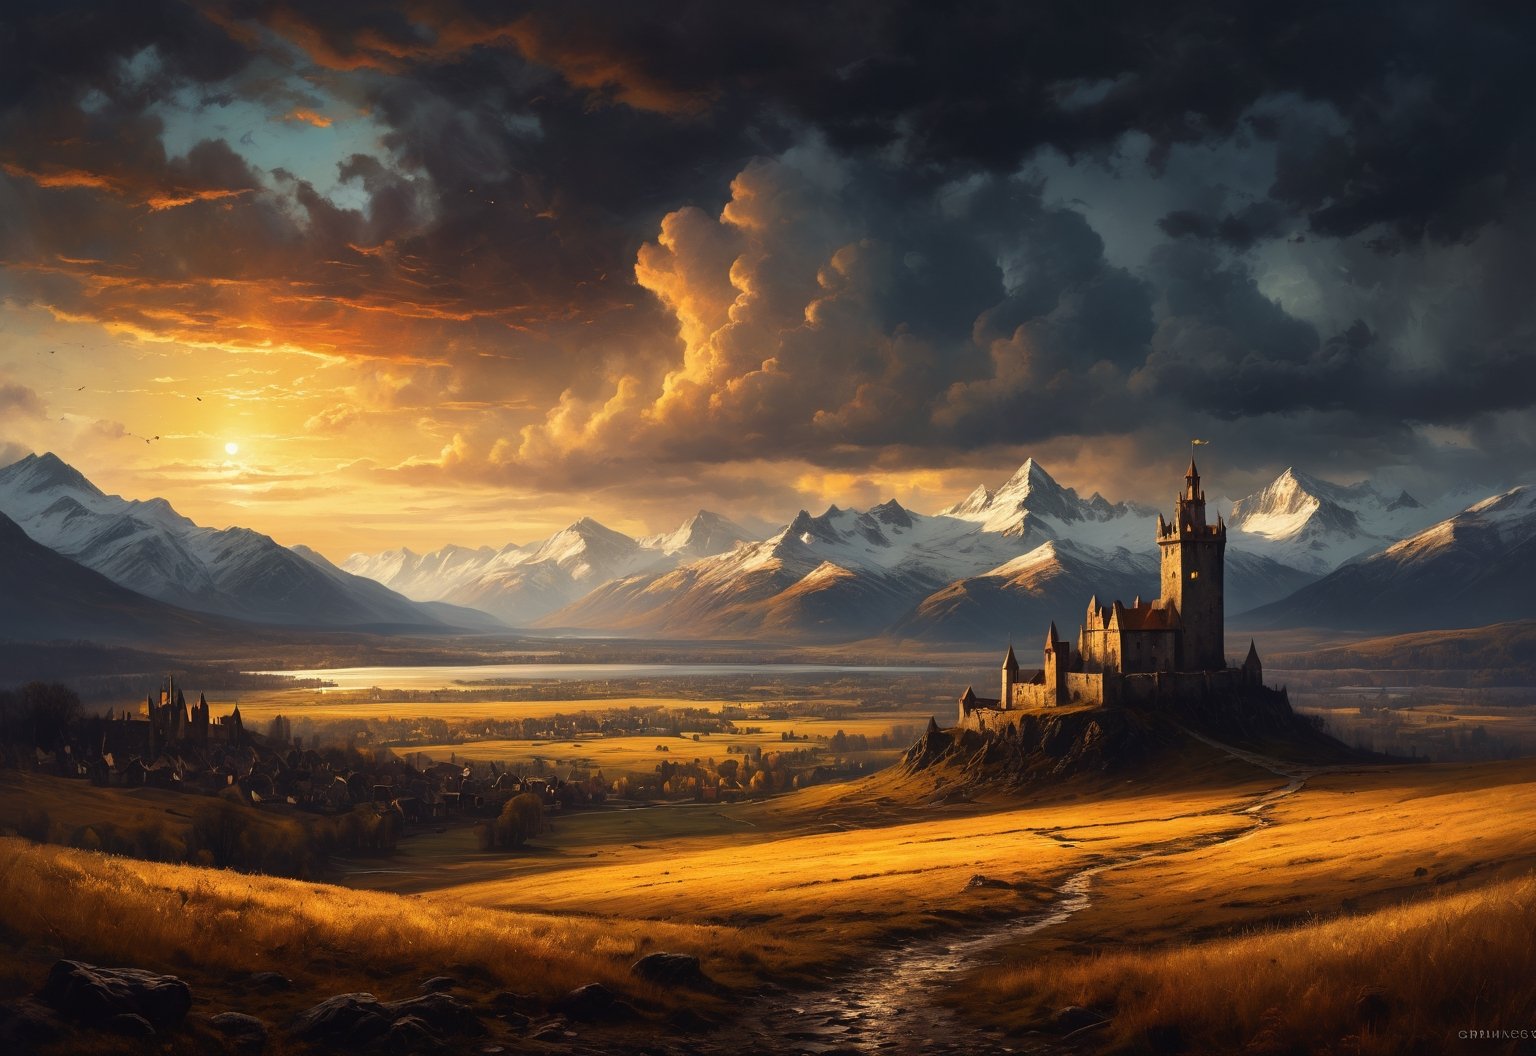 Large Ancient City in distance, surrounded by golden fields, clear lakes, distant snow capped mountains, a single dark slim watch tower on the horizon, golden hour sunlight, moody clouds, mysterious scene, dark, fantasy art, horror, sleepy hollow style, fantasy art, DND, RPG, grimdark style, Movie Still, moody colours,darkart